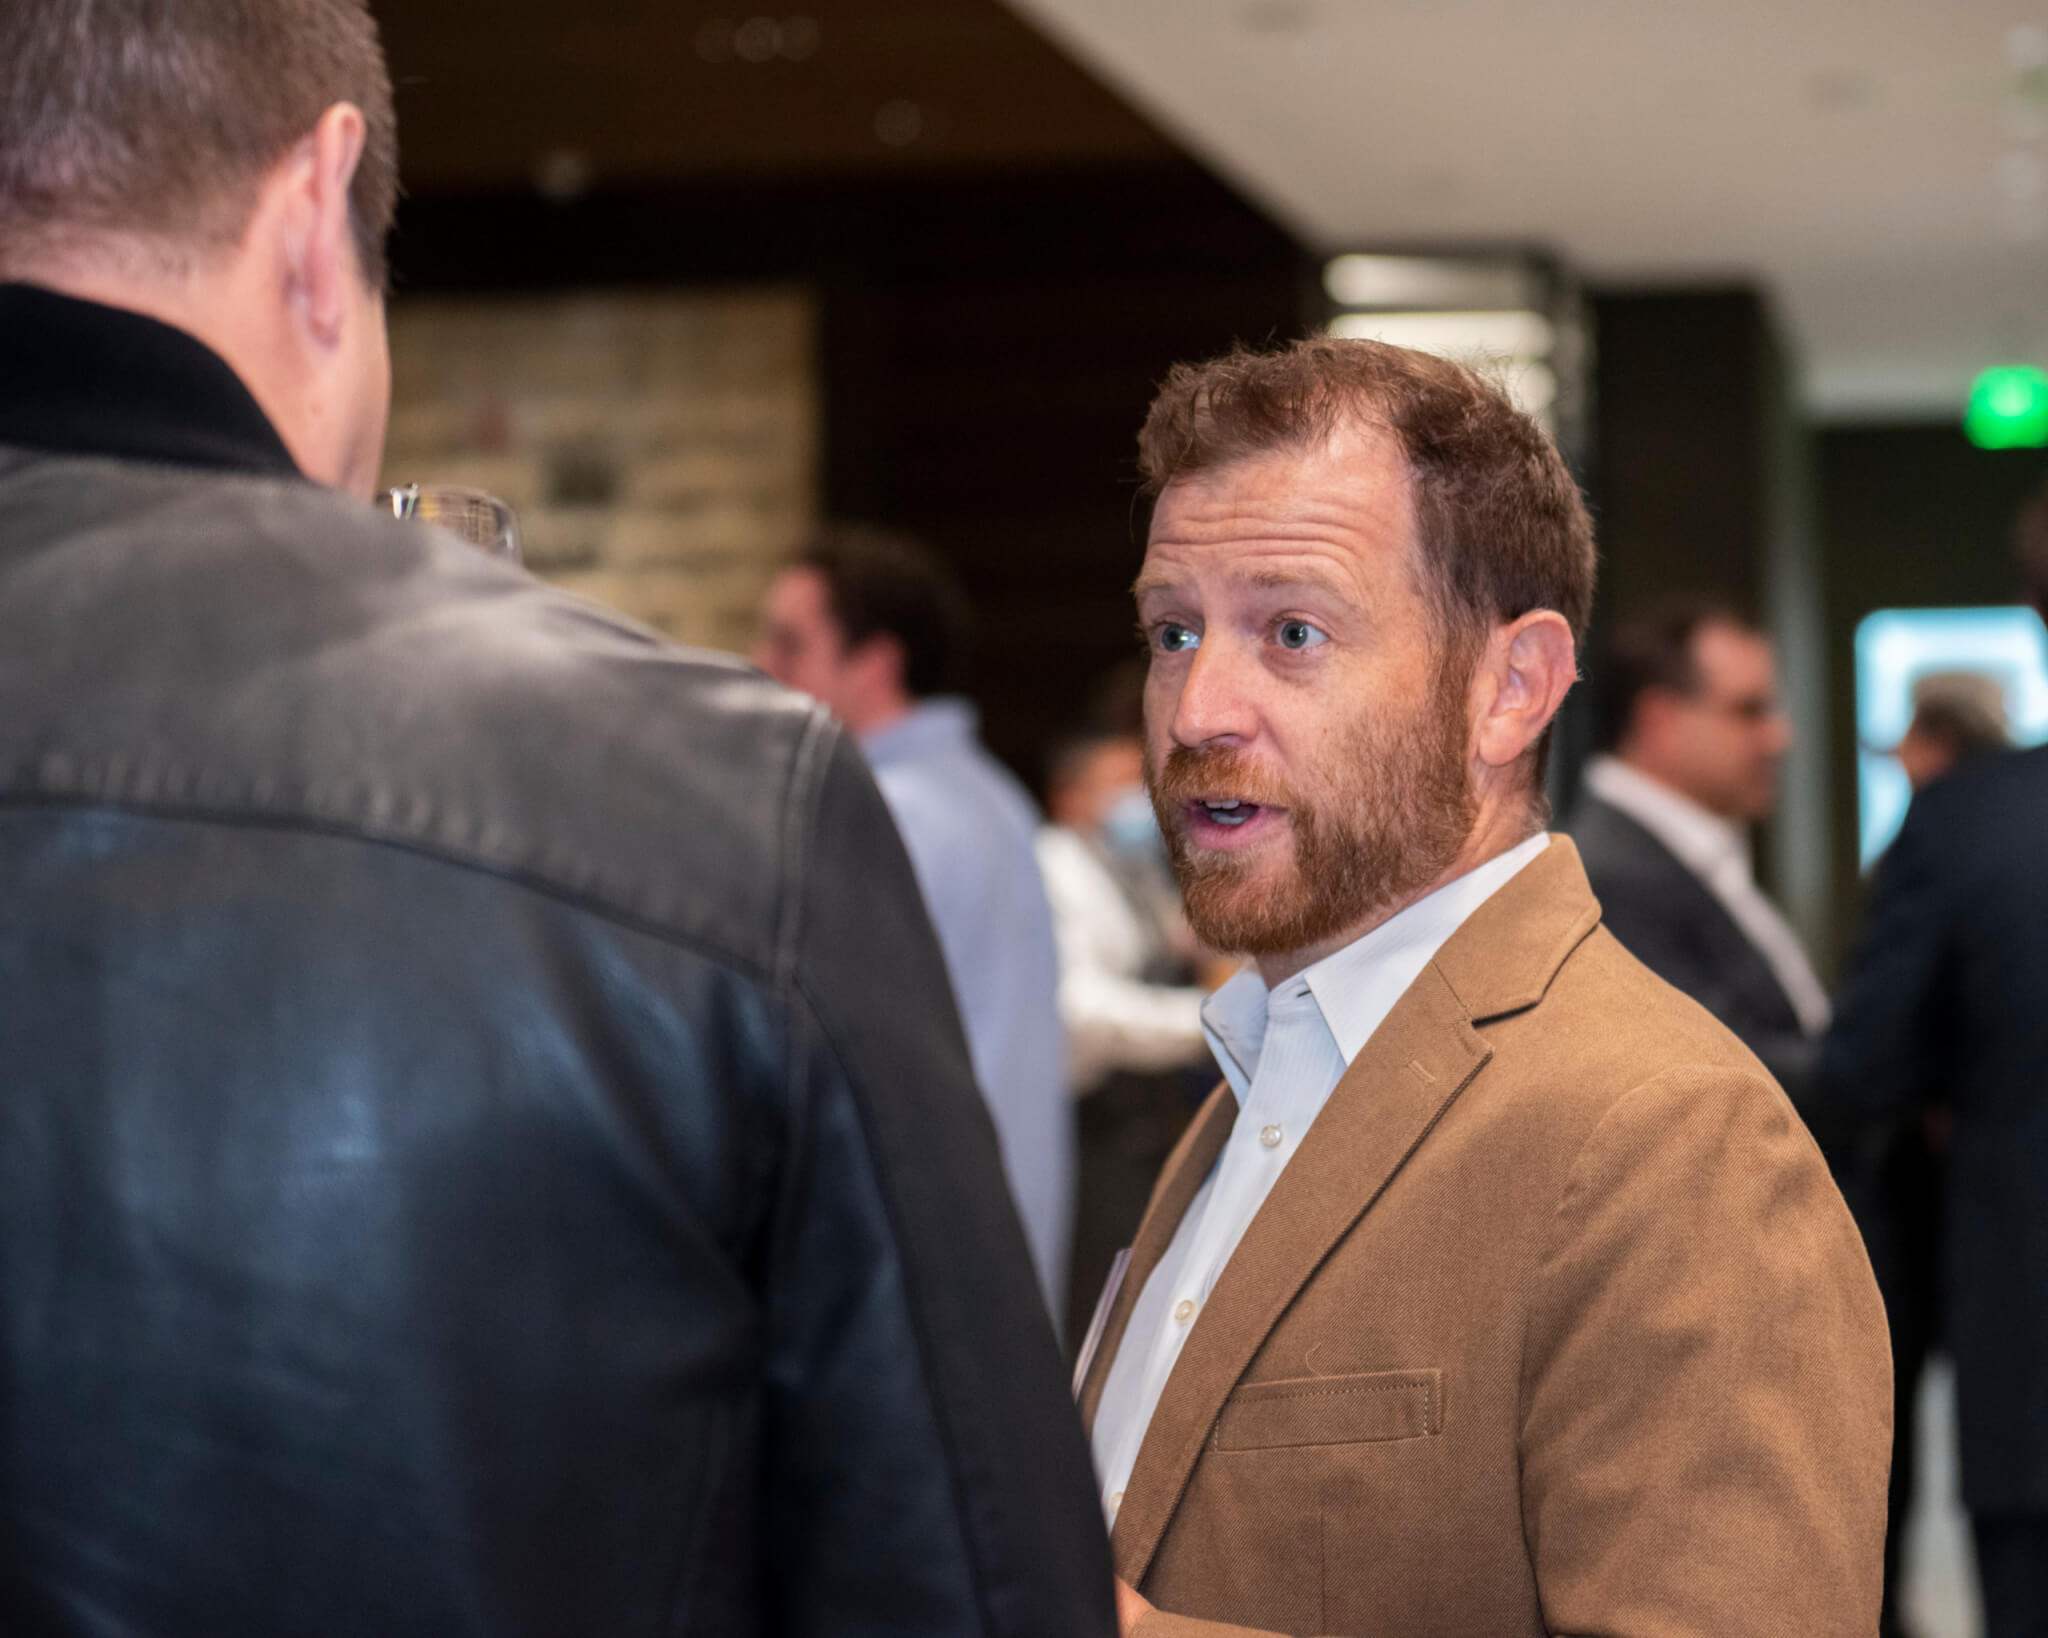 Networking at the Real Estate & Construction Network kick-off